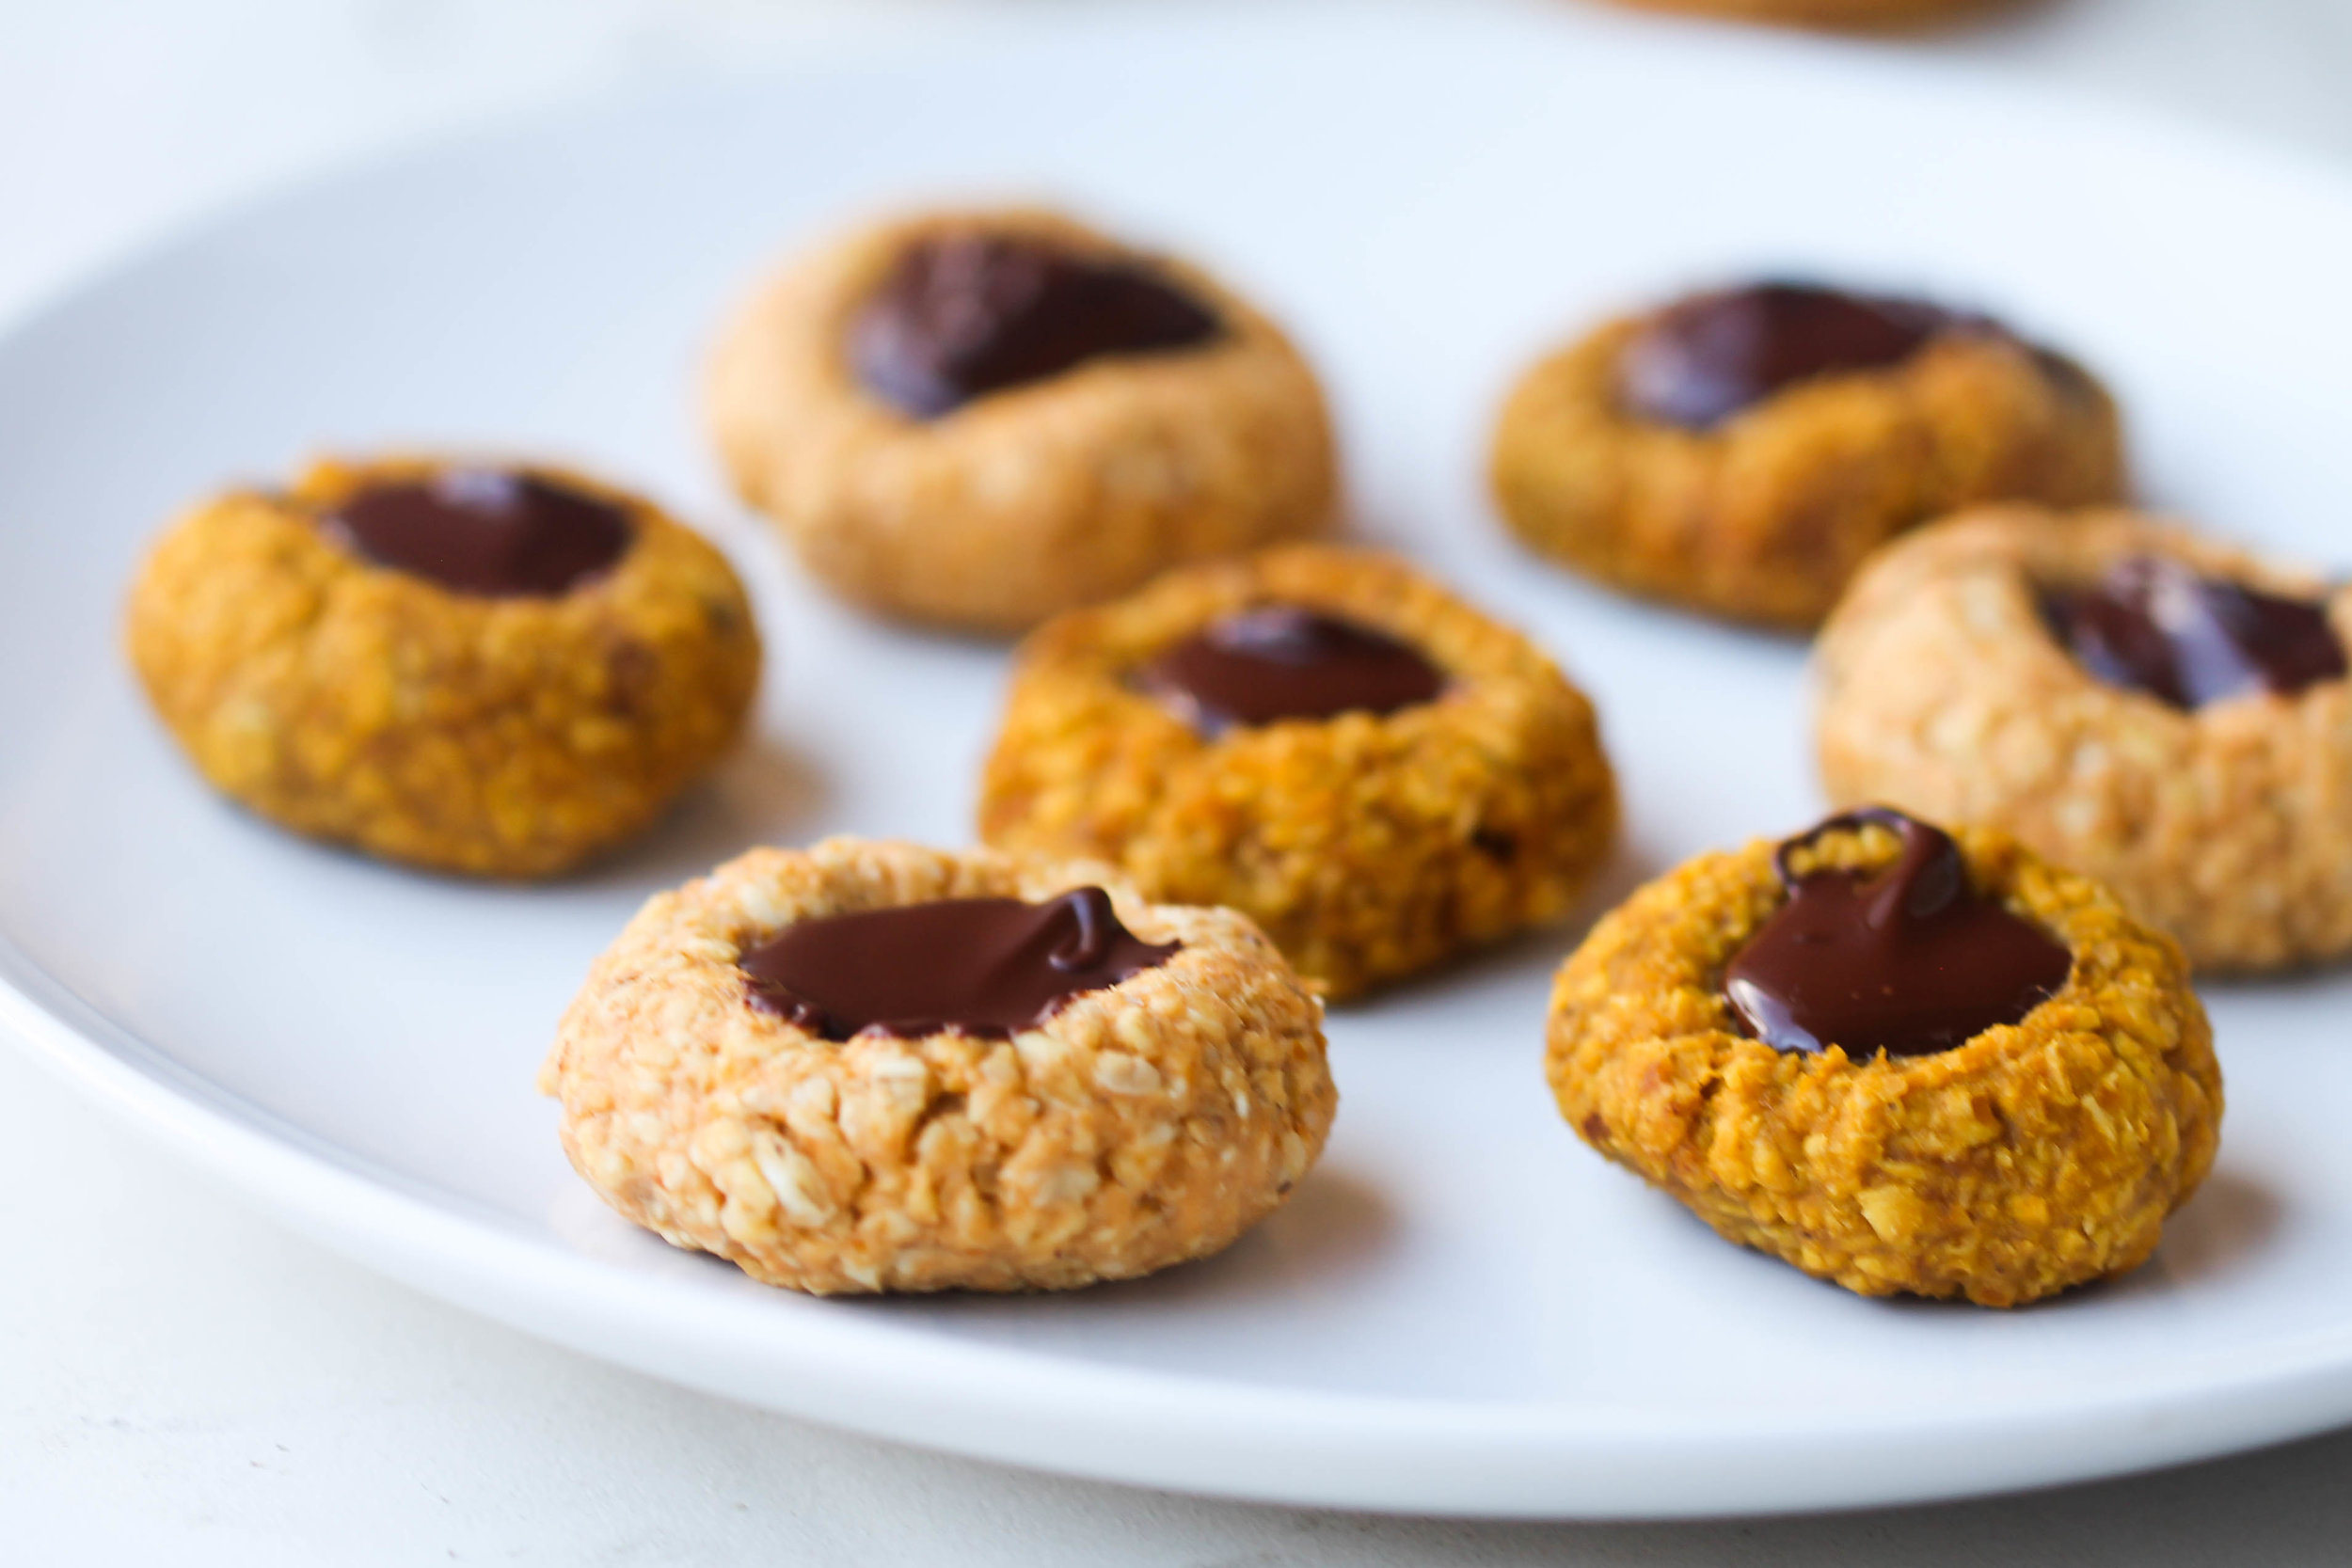 Oat and Pumpkin Thumbprint Cookies - Made in one bowl, great for snacking for both kids and adults. Naturally gluten-free, nut-free and can be made vegan friendly or raw.